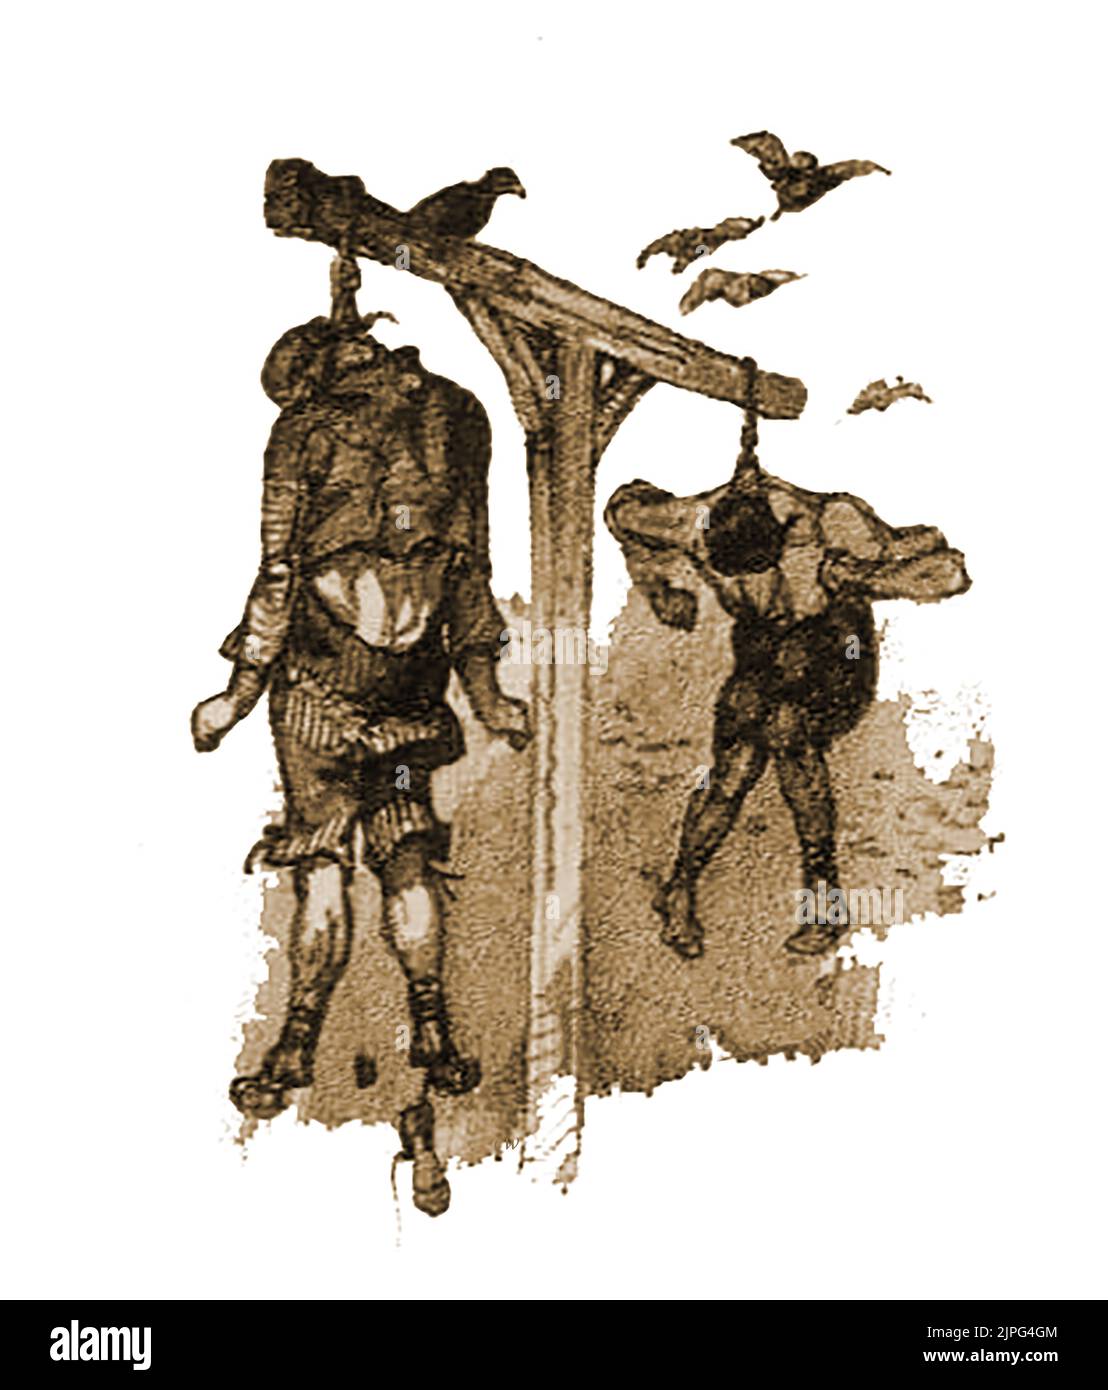 Execution - A very old graphic sketch of British  prisoners in the thoes of death at the time of their hanging.  Strangely the man at the back appears to have only one shoe on and the man at the front is similarly attired but with his spare shoe hanging by a lace from his other foot. Stock Photo